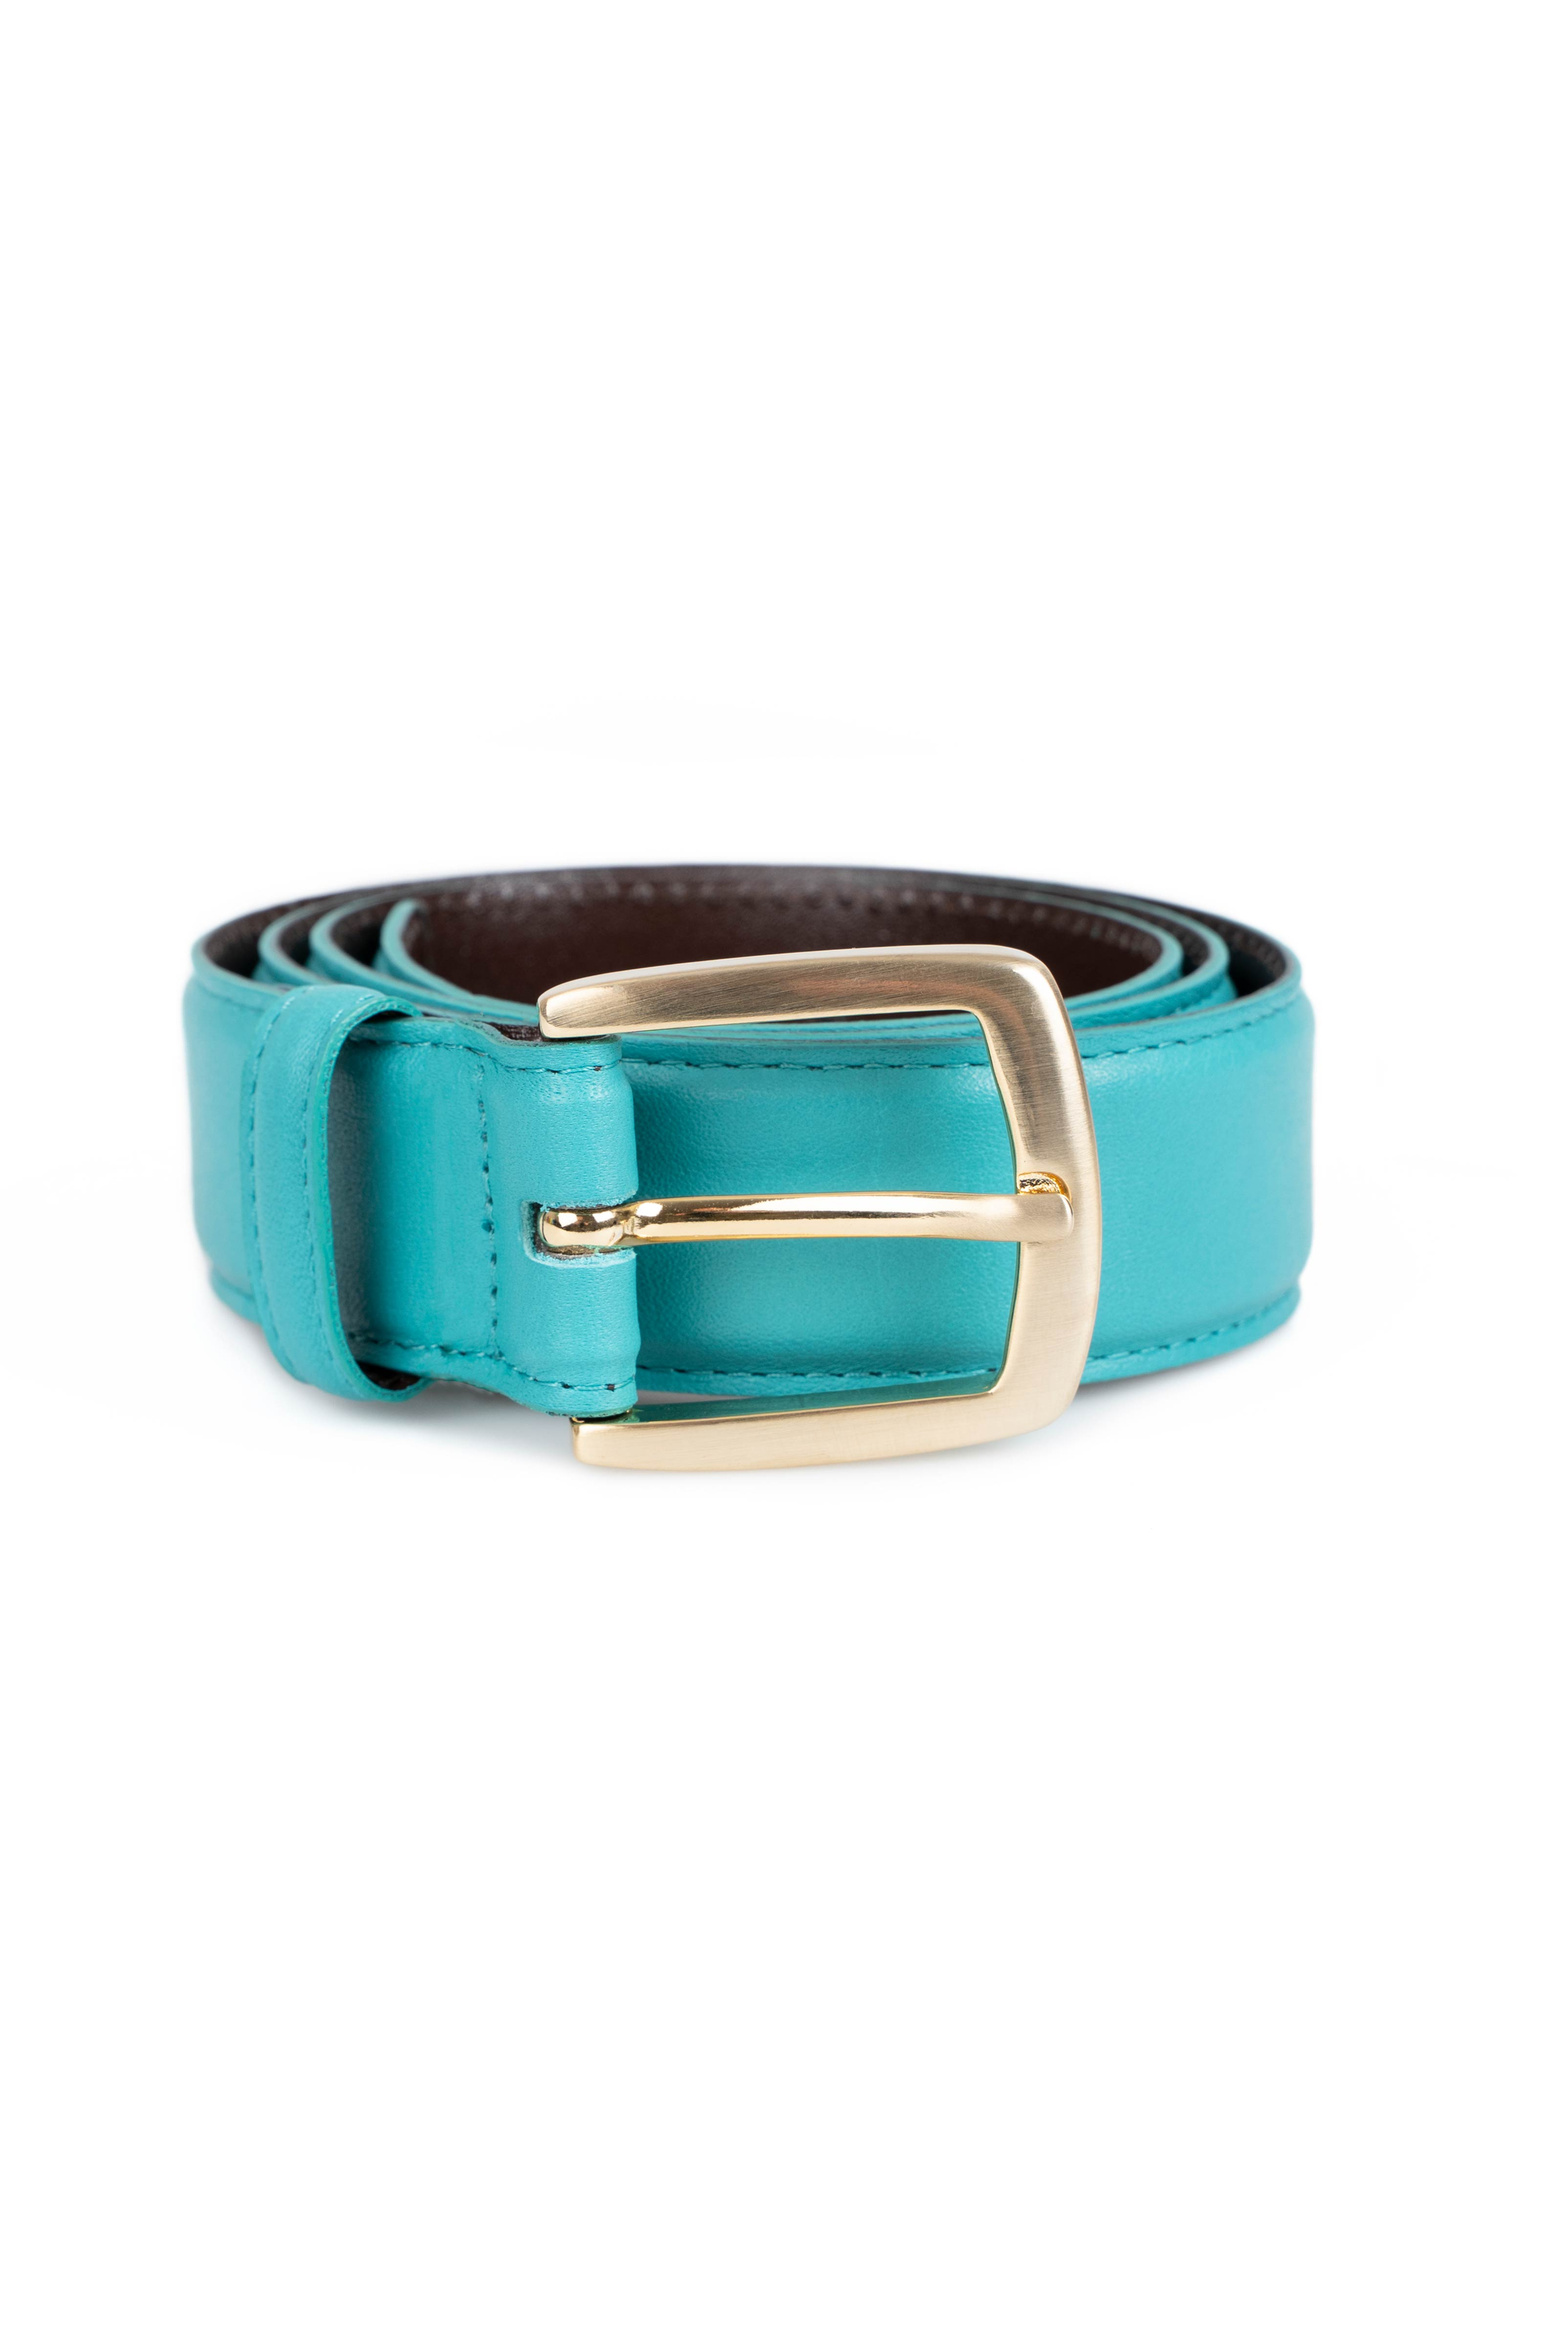 be150_classic-leather-belt_turquoise.jpg